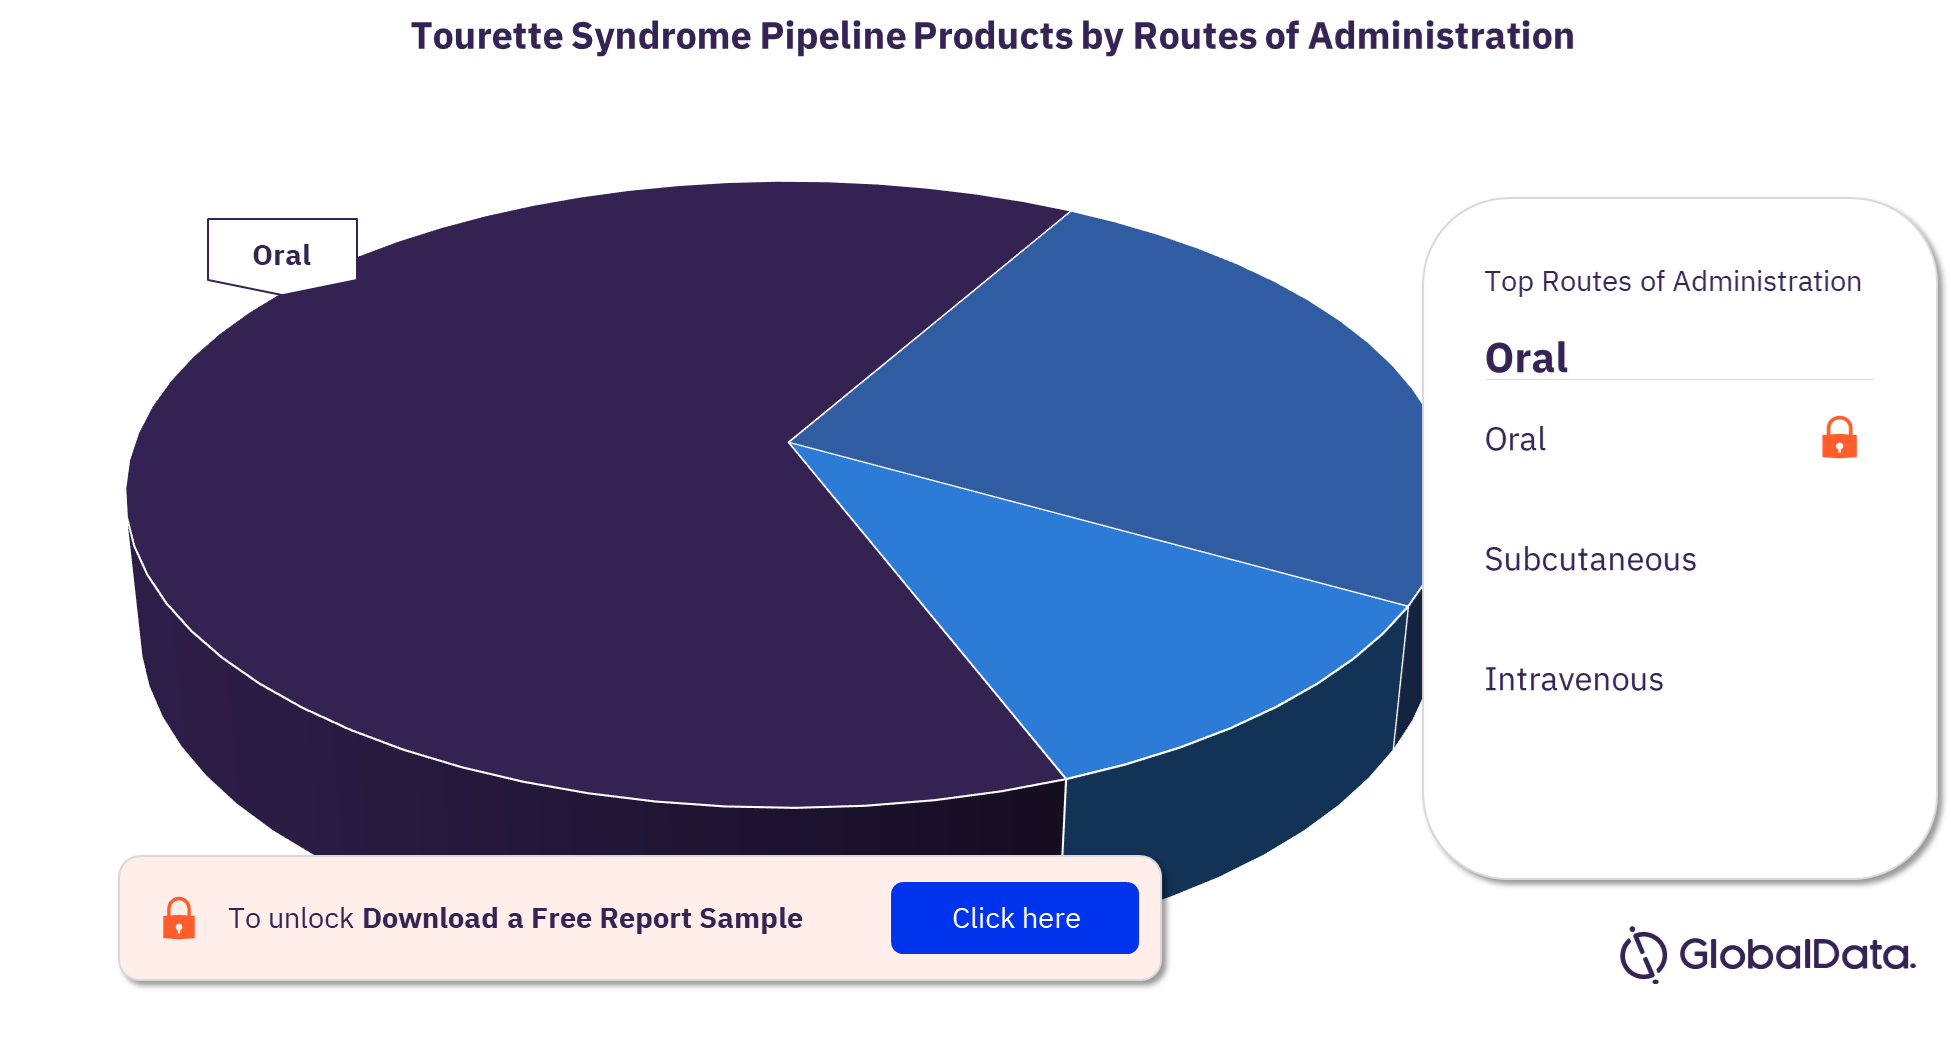 Tourette syndrome pipeline drugs market, by routes of administration